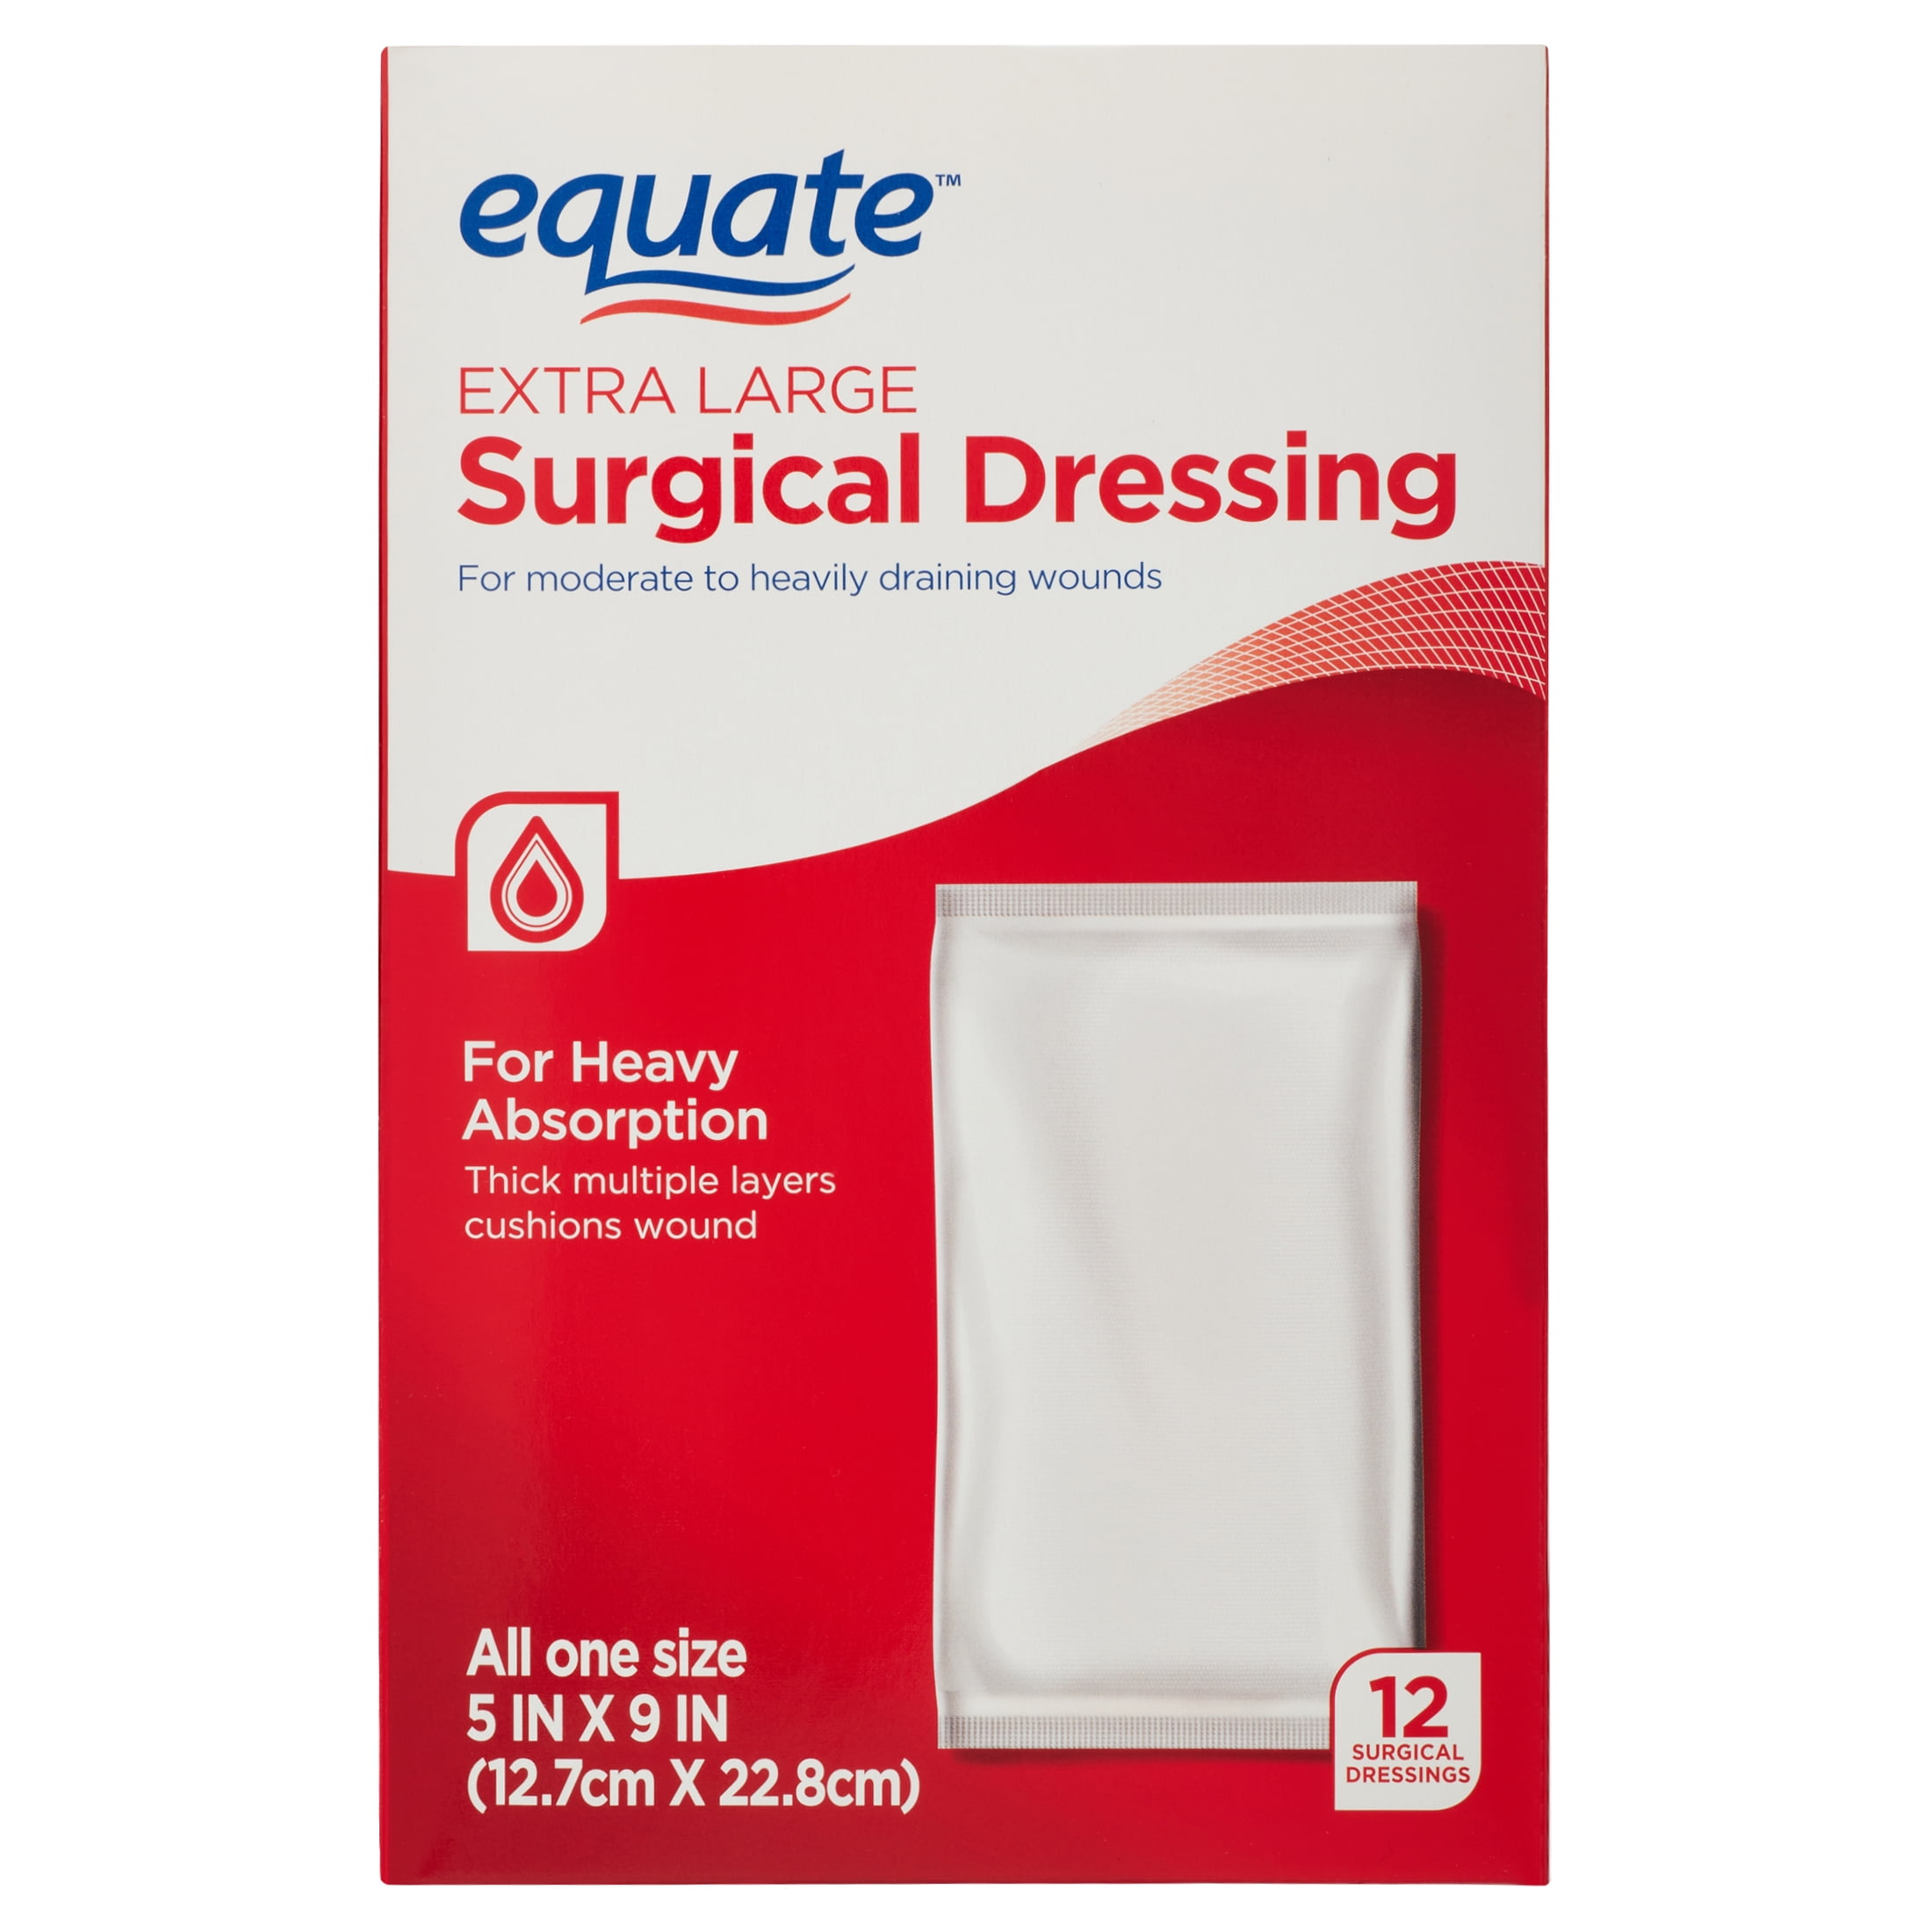 Equate Extra Large Absorbent Surgical Dressing, For Moderate to Heavy Wounds, 12 Count